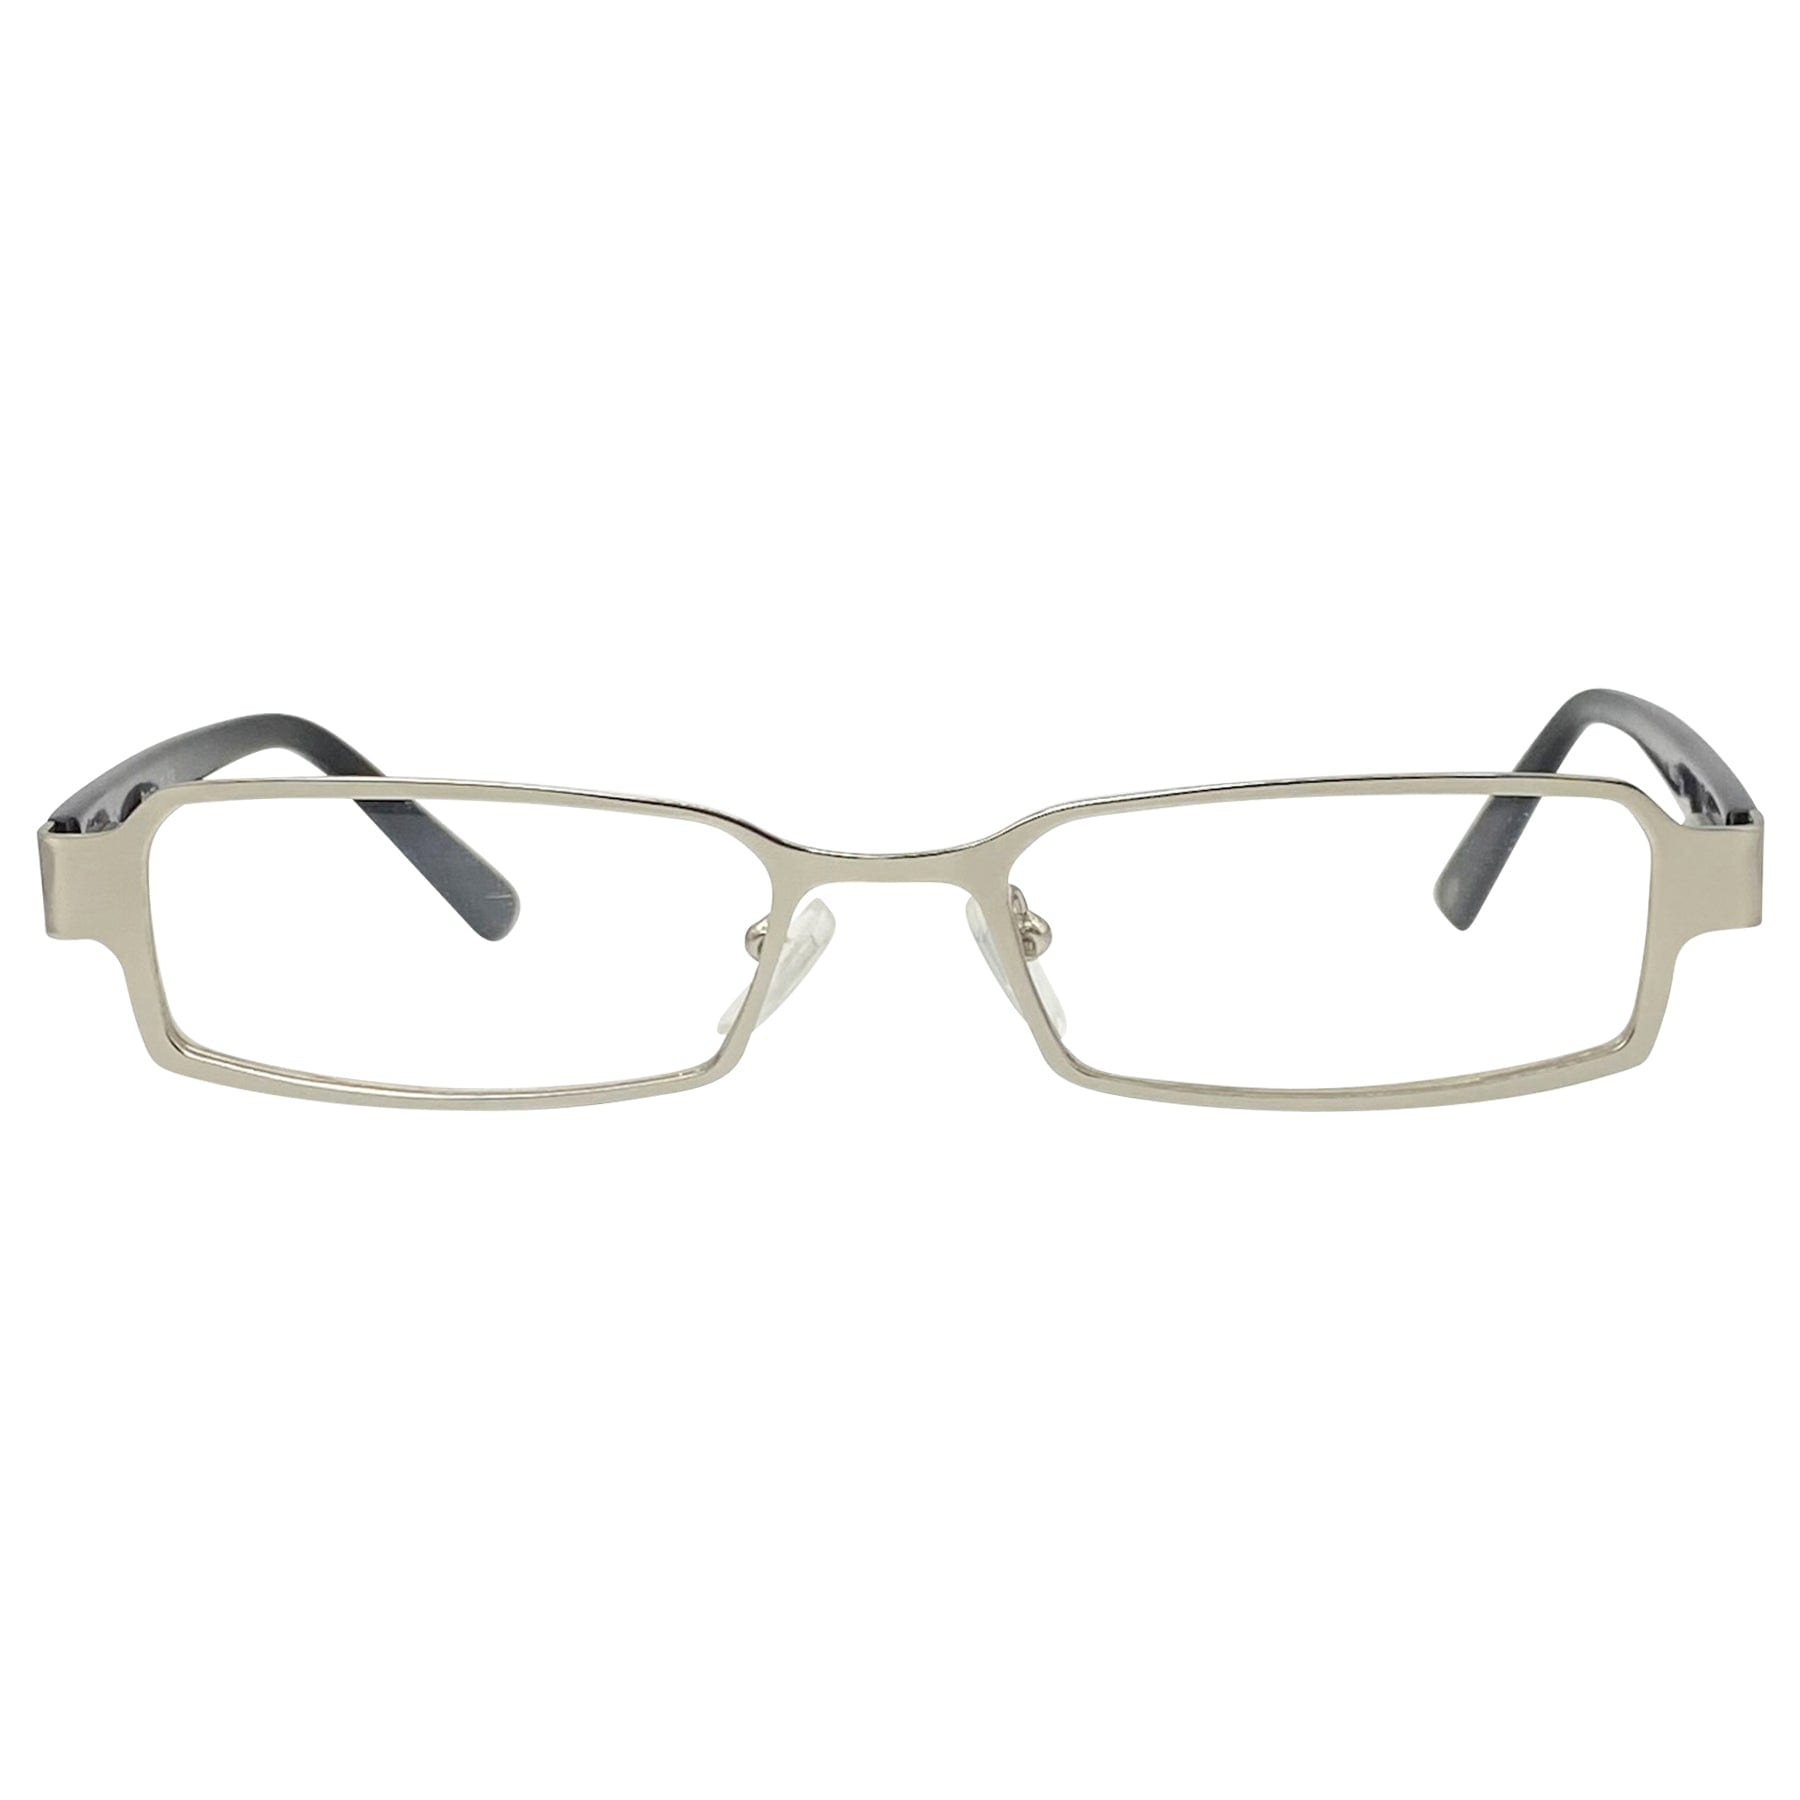 clear fashion glasses with a silver metal 90s style frame